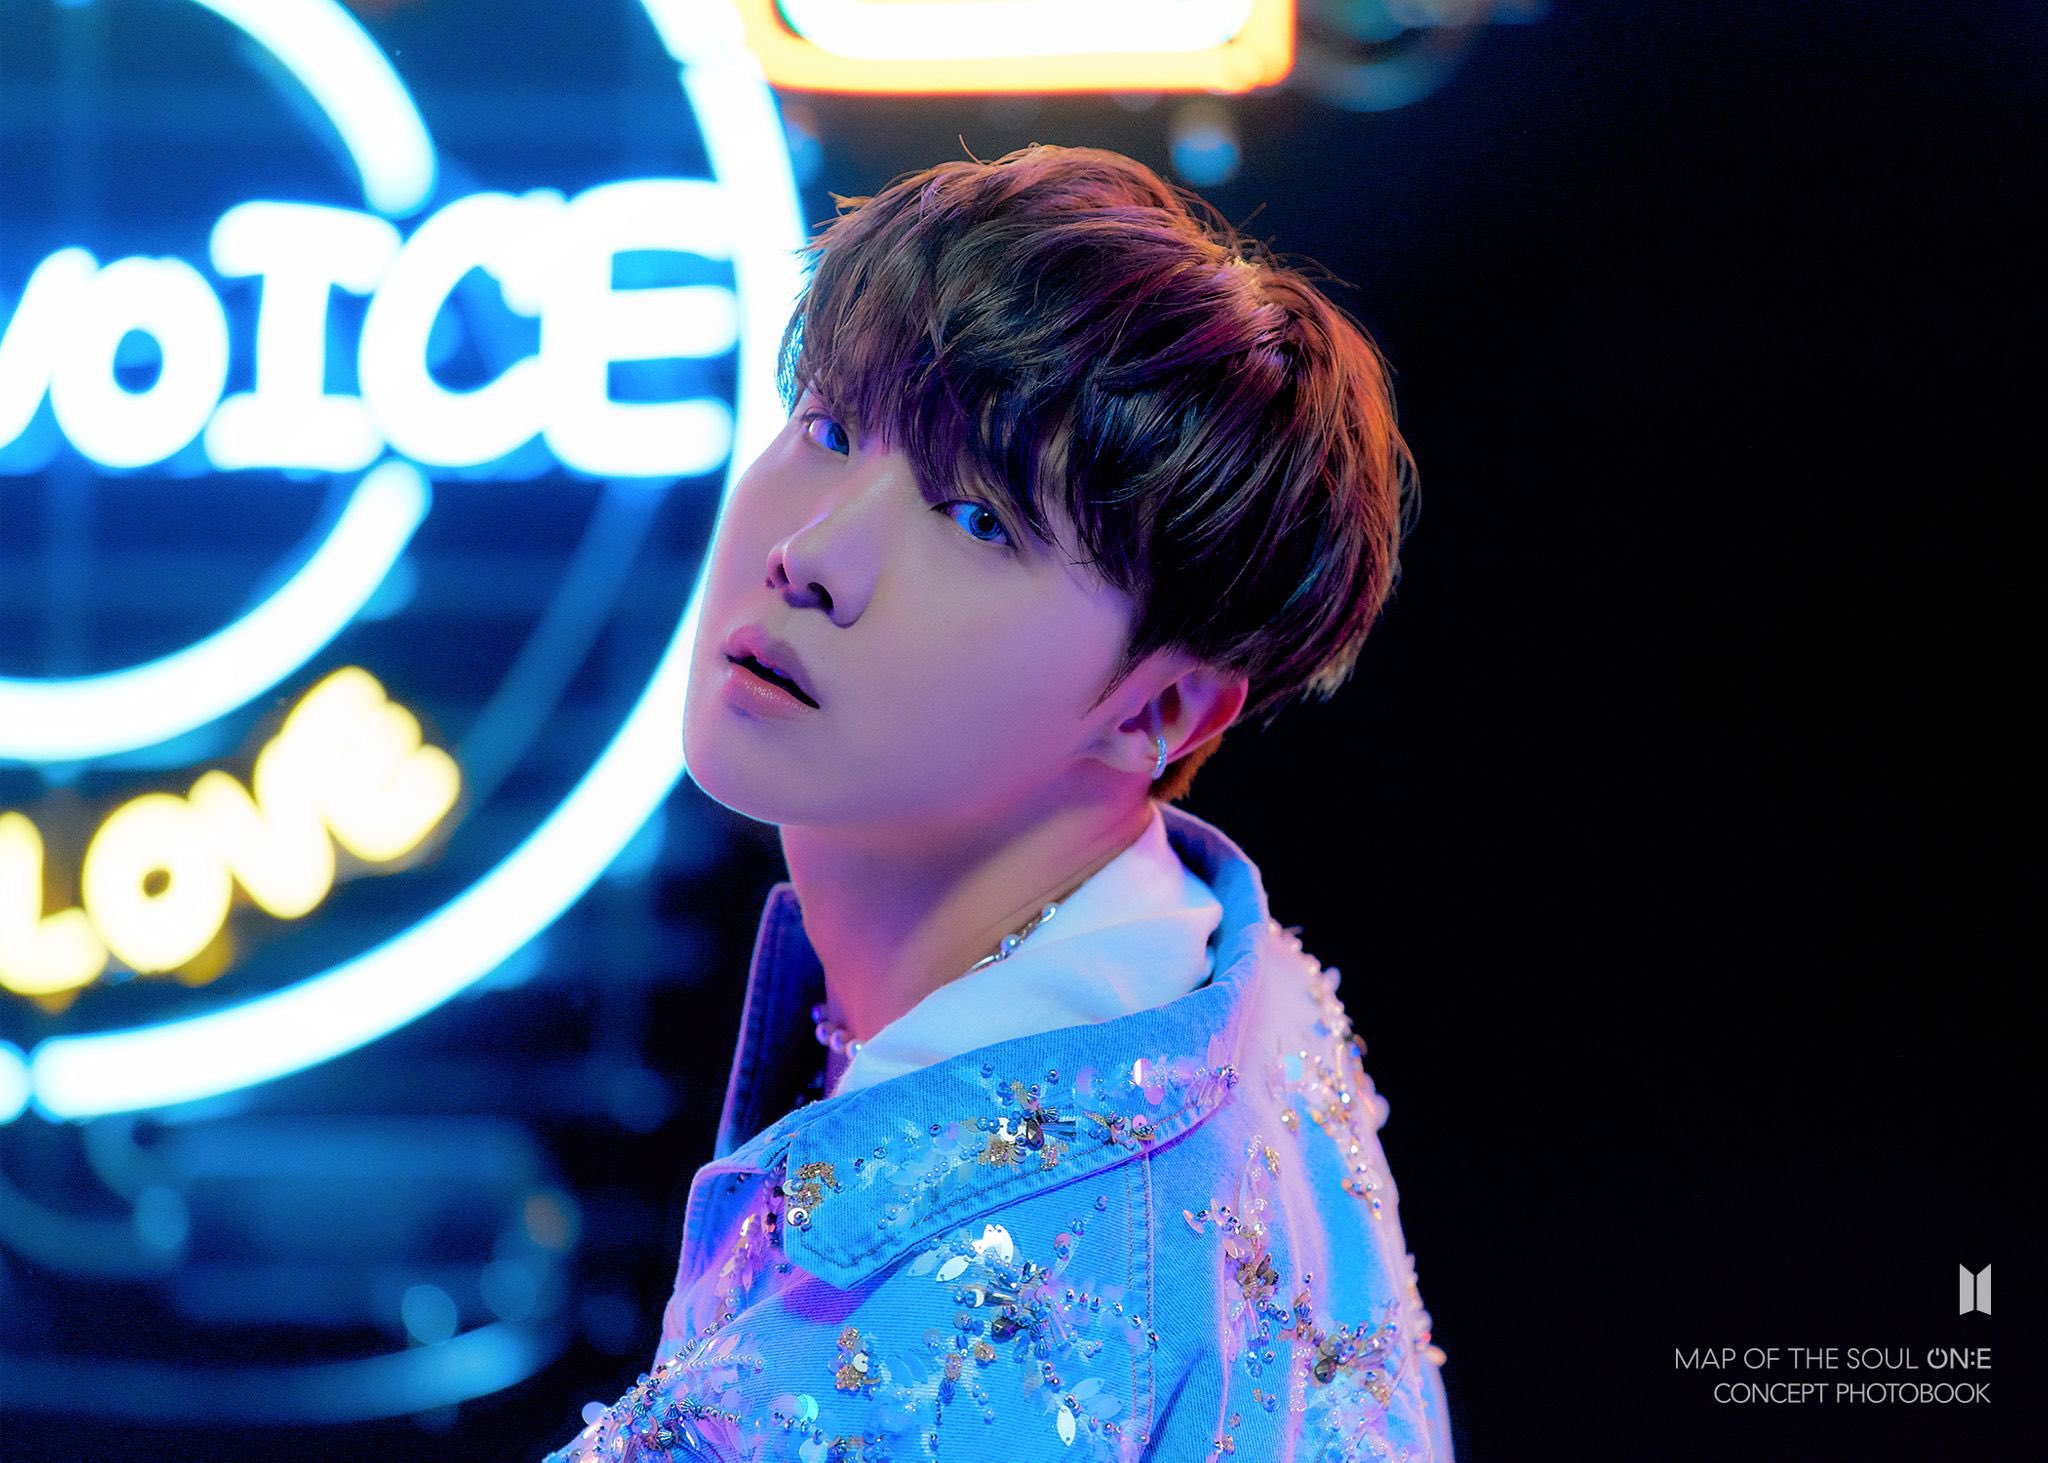 MAP OF THE SOUL ON:E CONCEPT PHOTOBOOK Preview Cuts CLUE Ver. [PERSONA] | J-HOPE